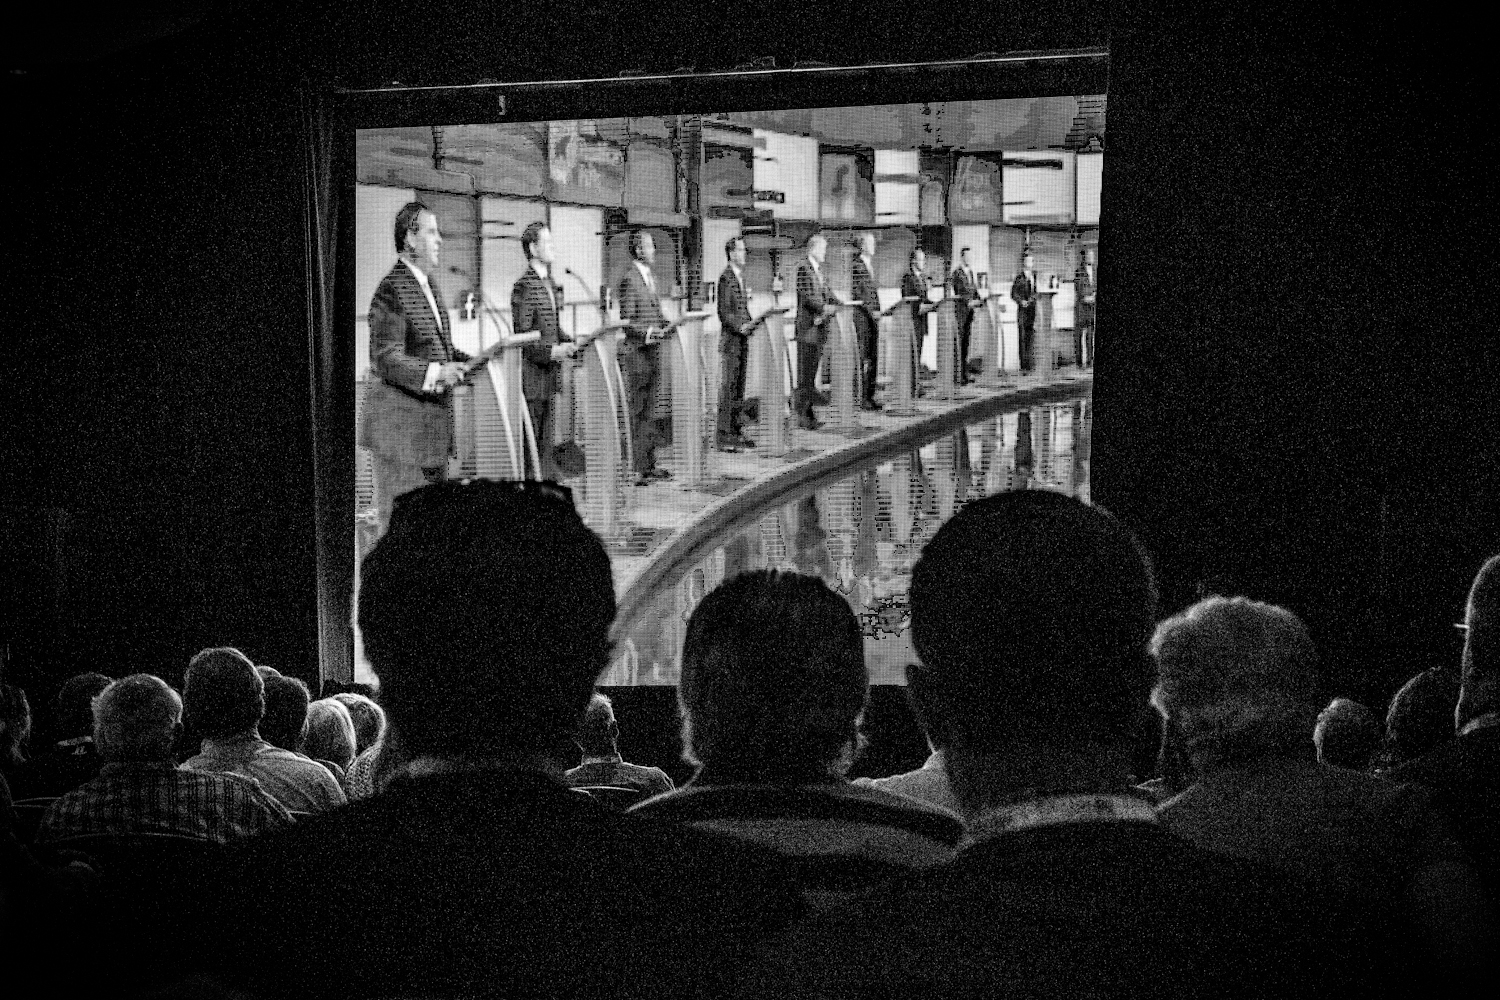 Attendees at the RedState Gathering watch the first 2016 Republican presidential debate,which took place in Cleveland, Ohio. Atlanta, Georgia, Aug. 6, 2016.